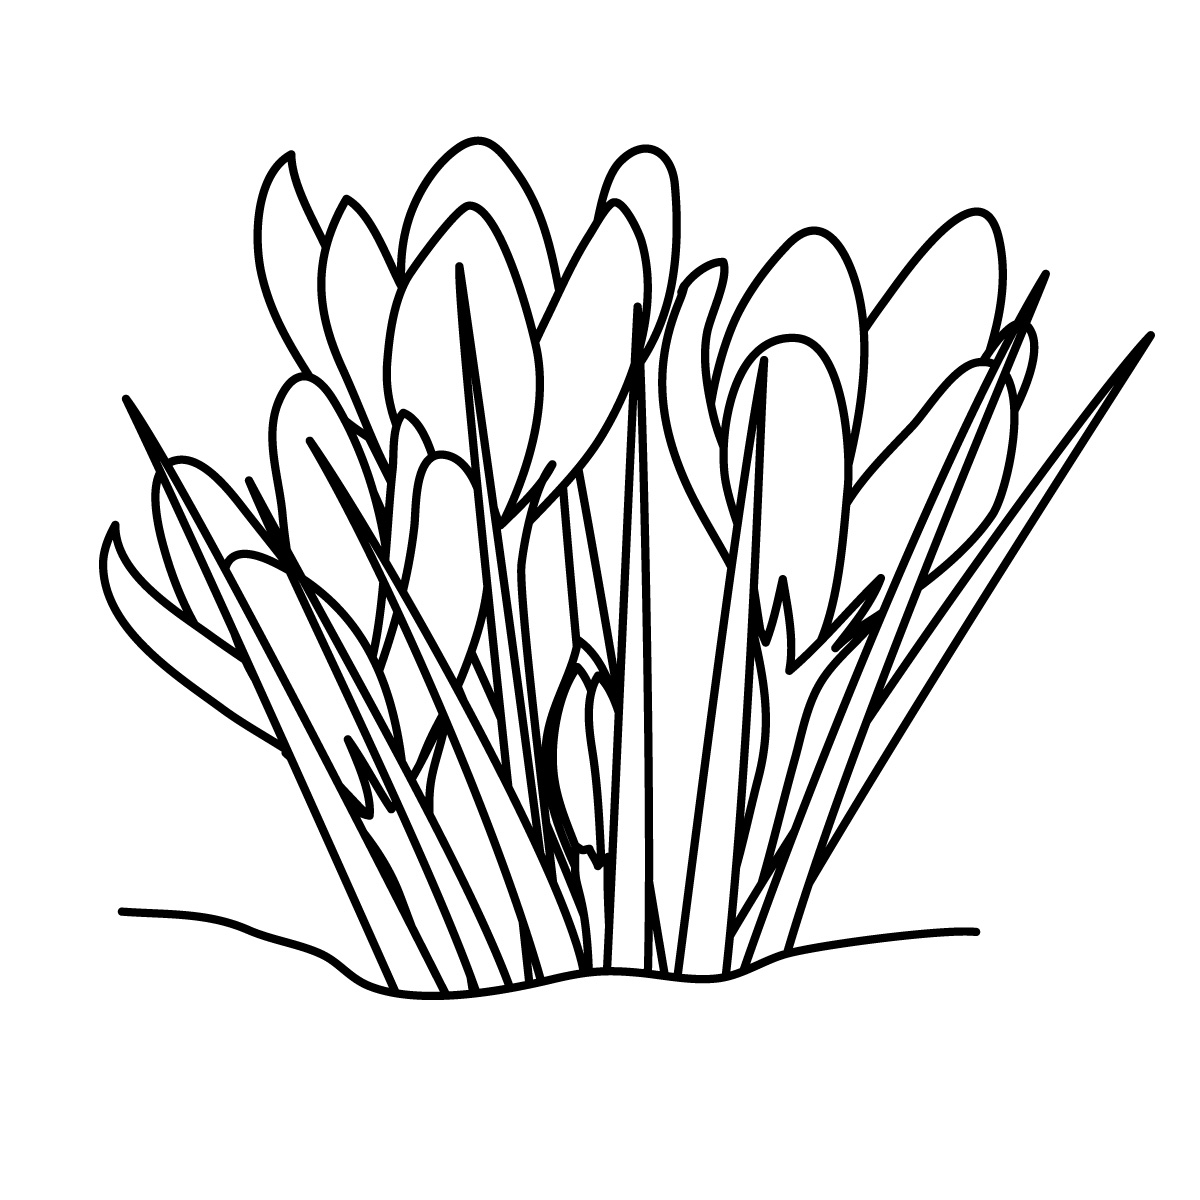 Grass and flowers clipart black and white